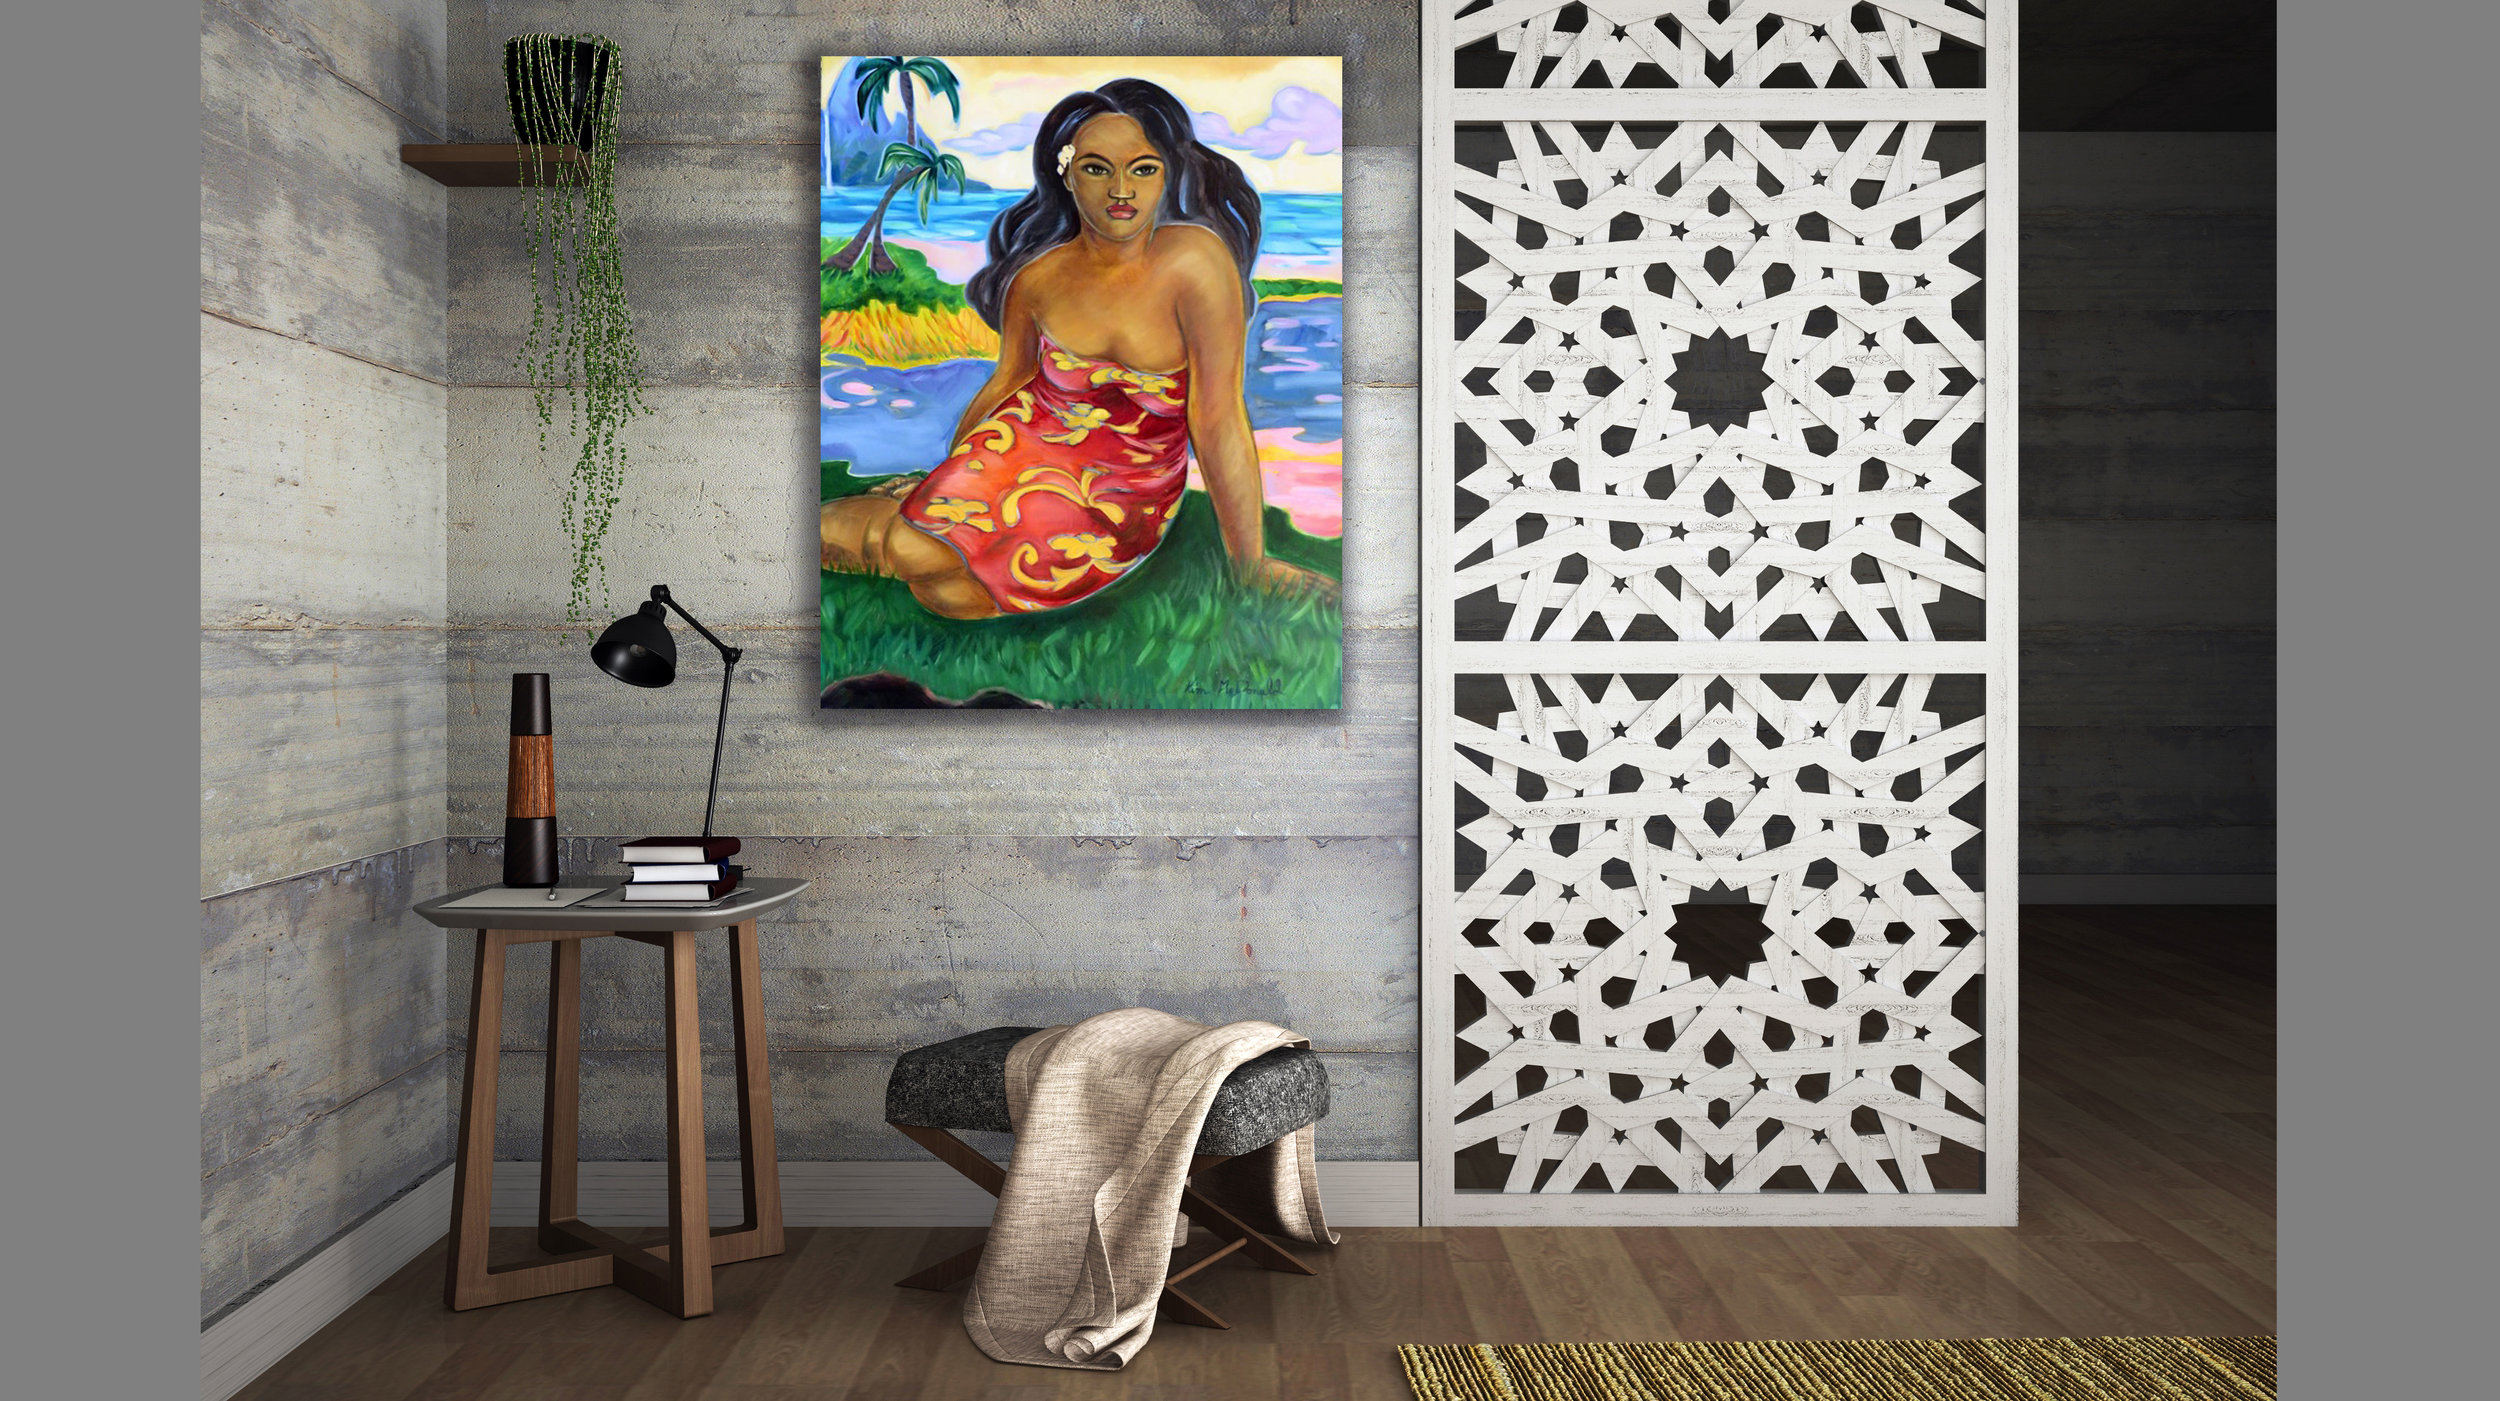  Maui inspired painting by artist Kim McDonald on an interior wall 